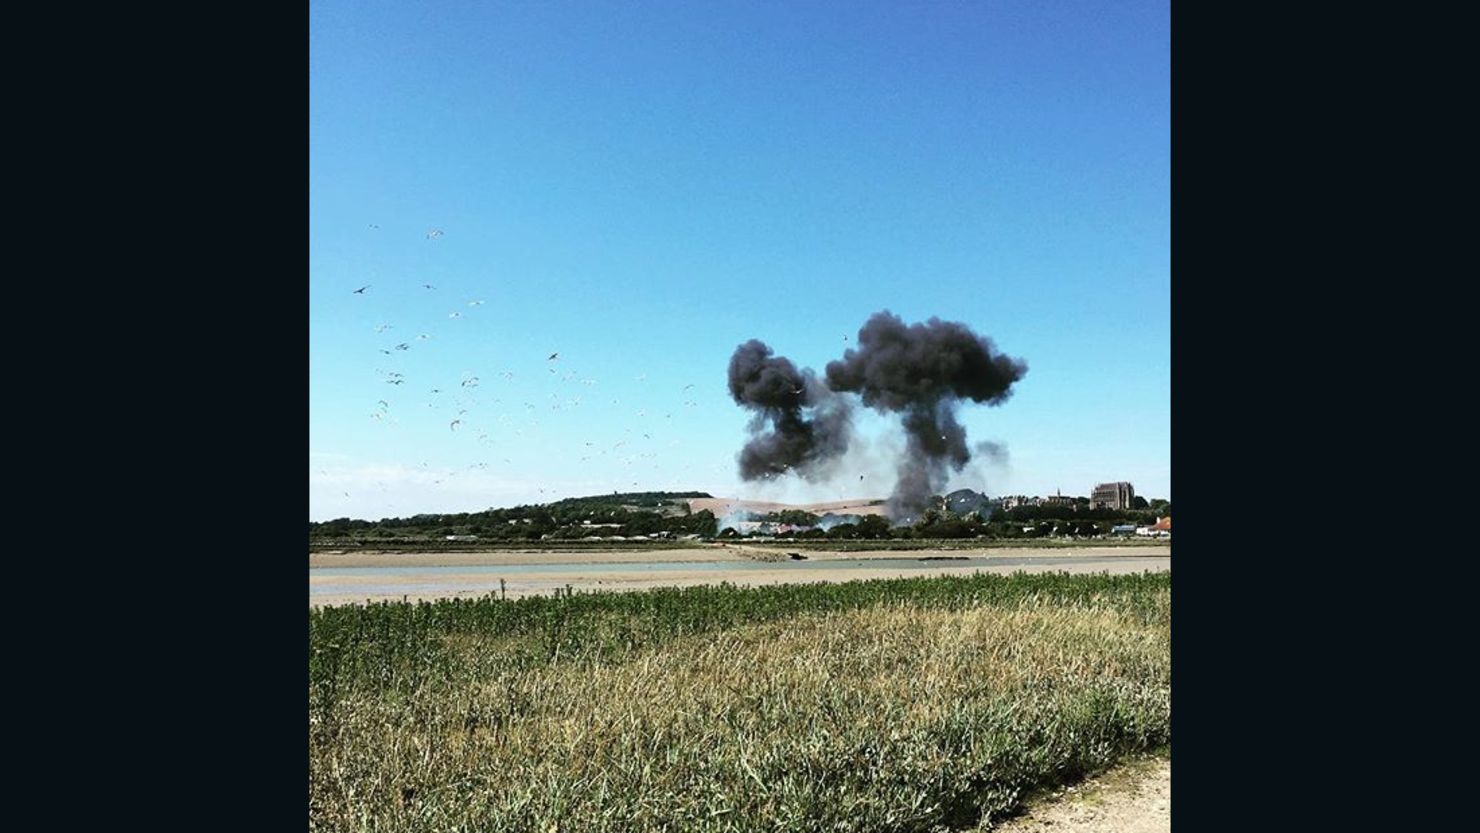 Instagram user @sousanka was at the Shoreham Airshow, UK when a jet crashed, killing up to 20 people Saturday. She shared this photo of smoke rising from the scene. 